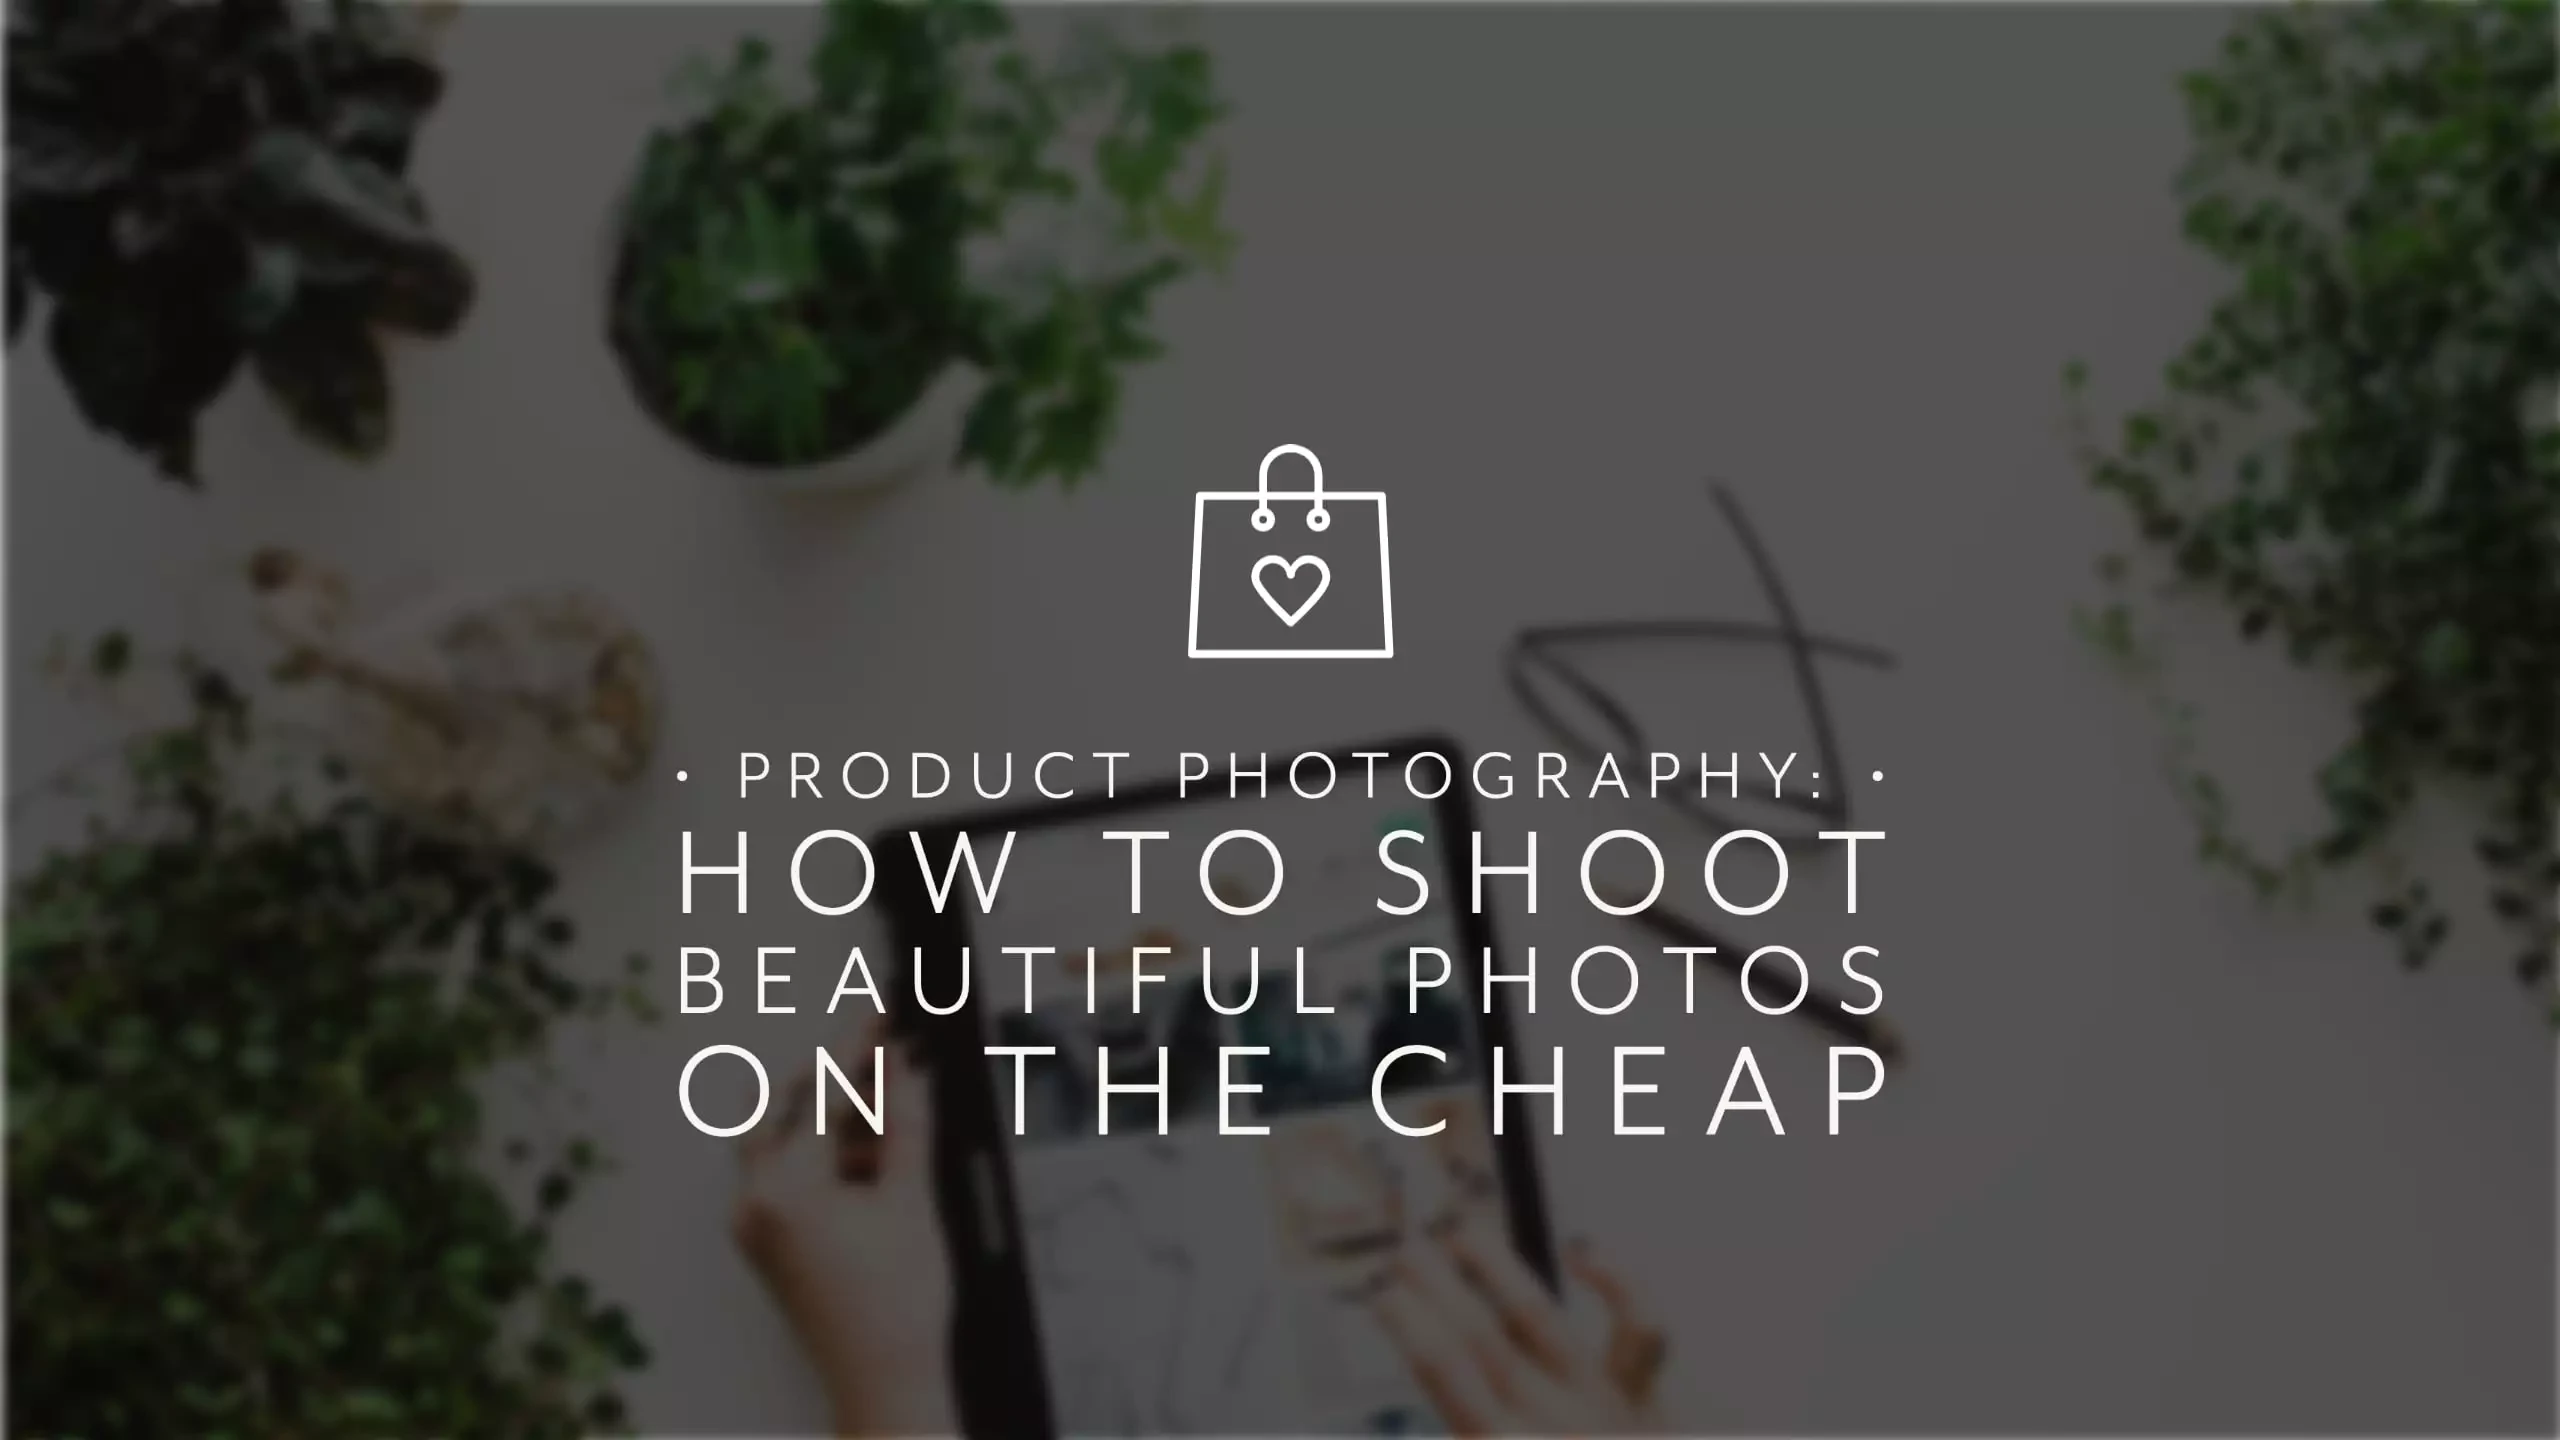 Product Photography: How to Shoot Beautiful Photos on the Cheap